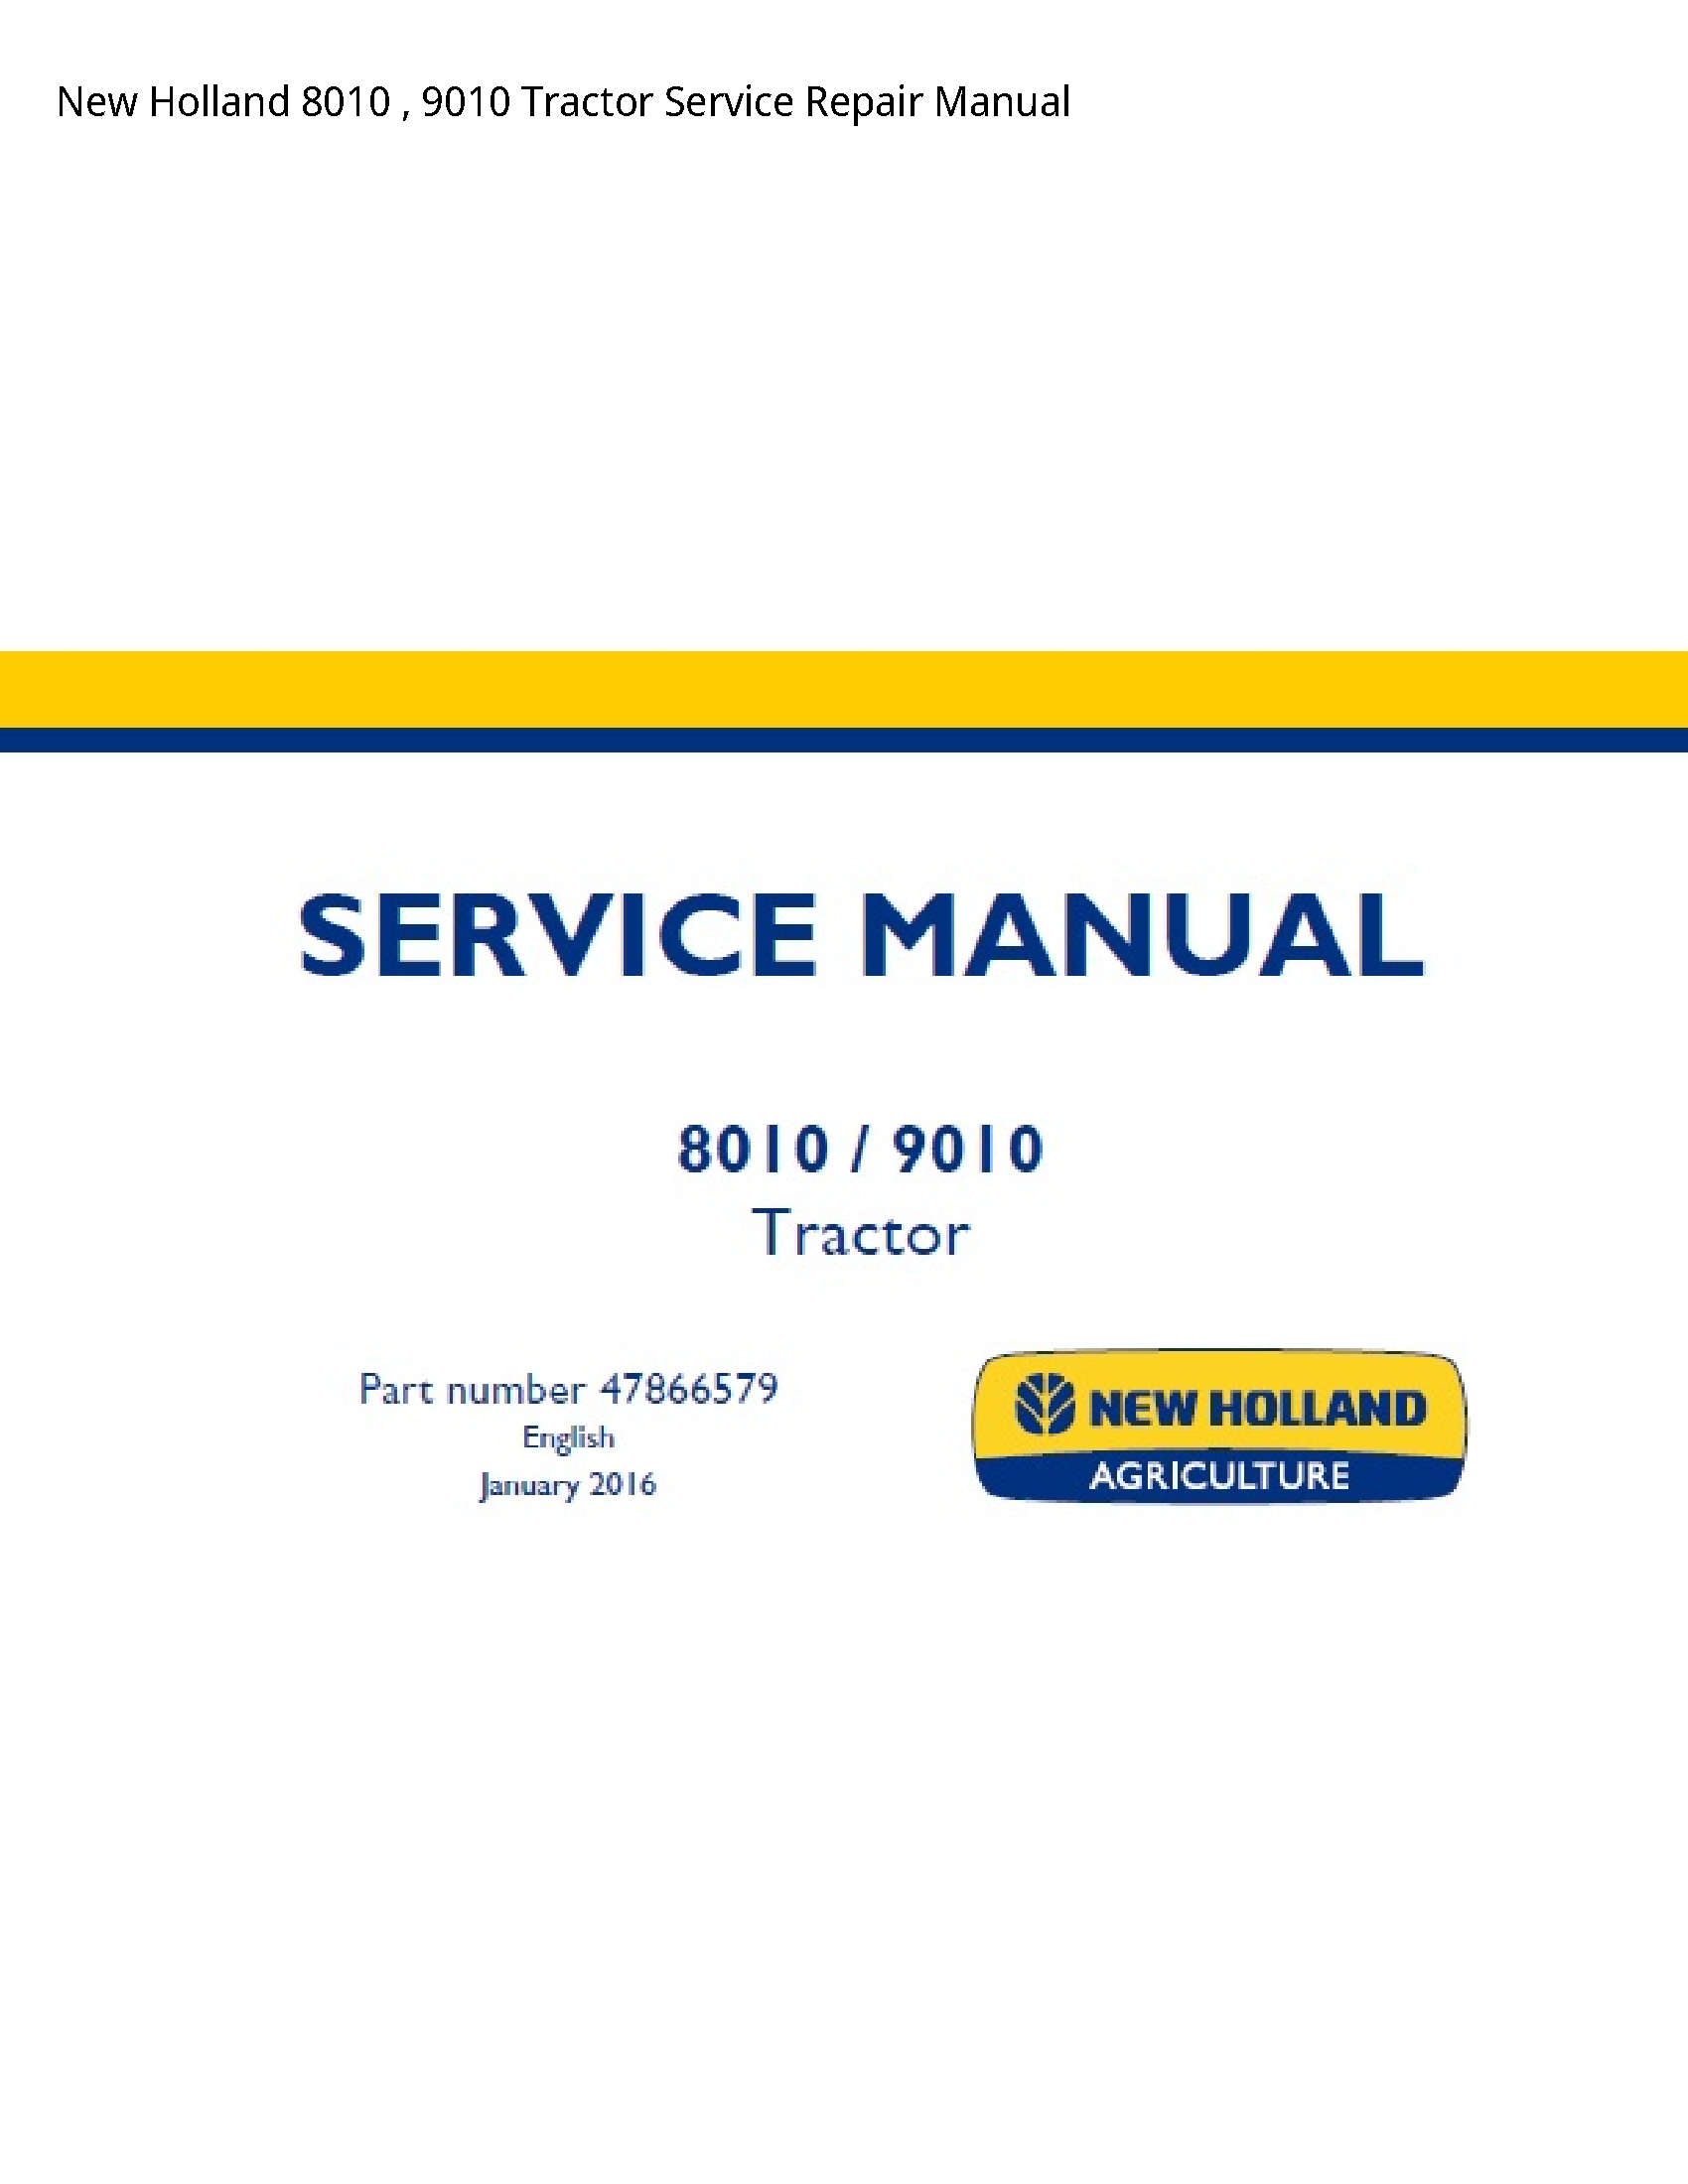 New Holland 8010 Tractor manual